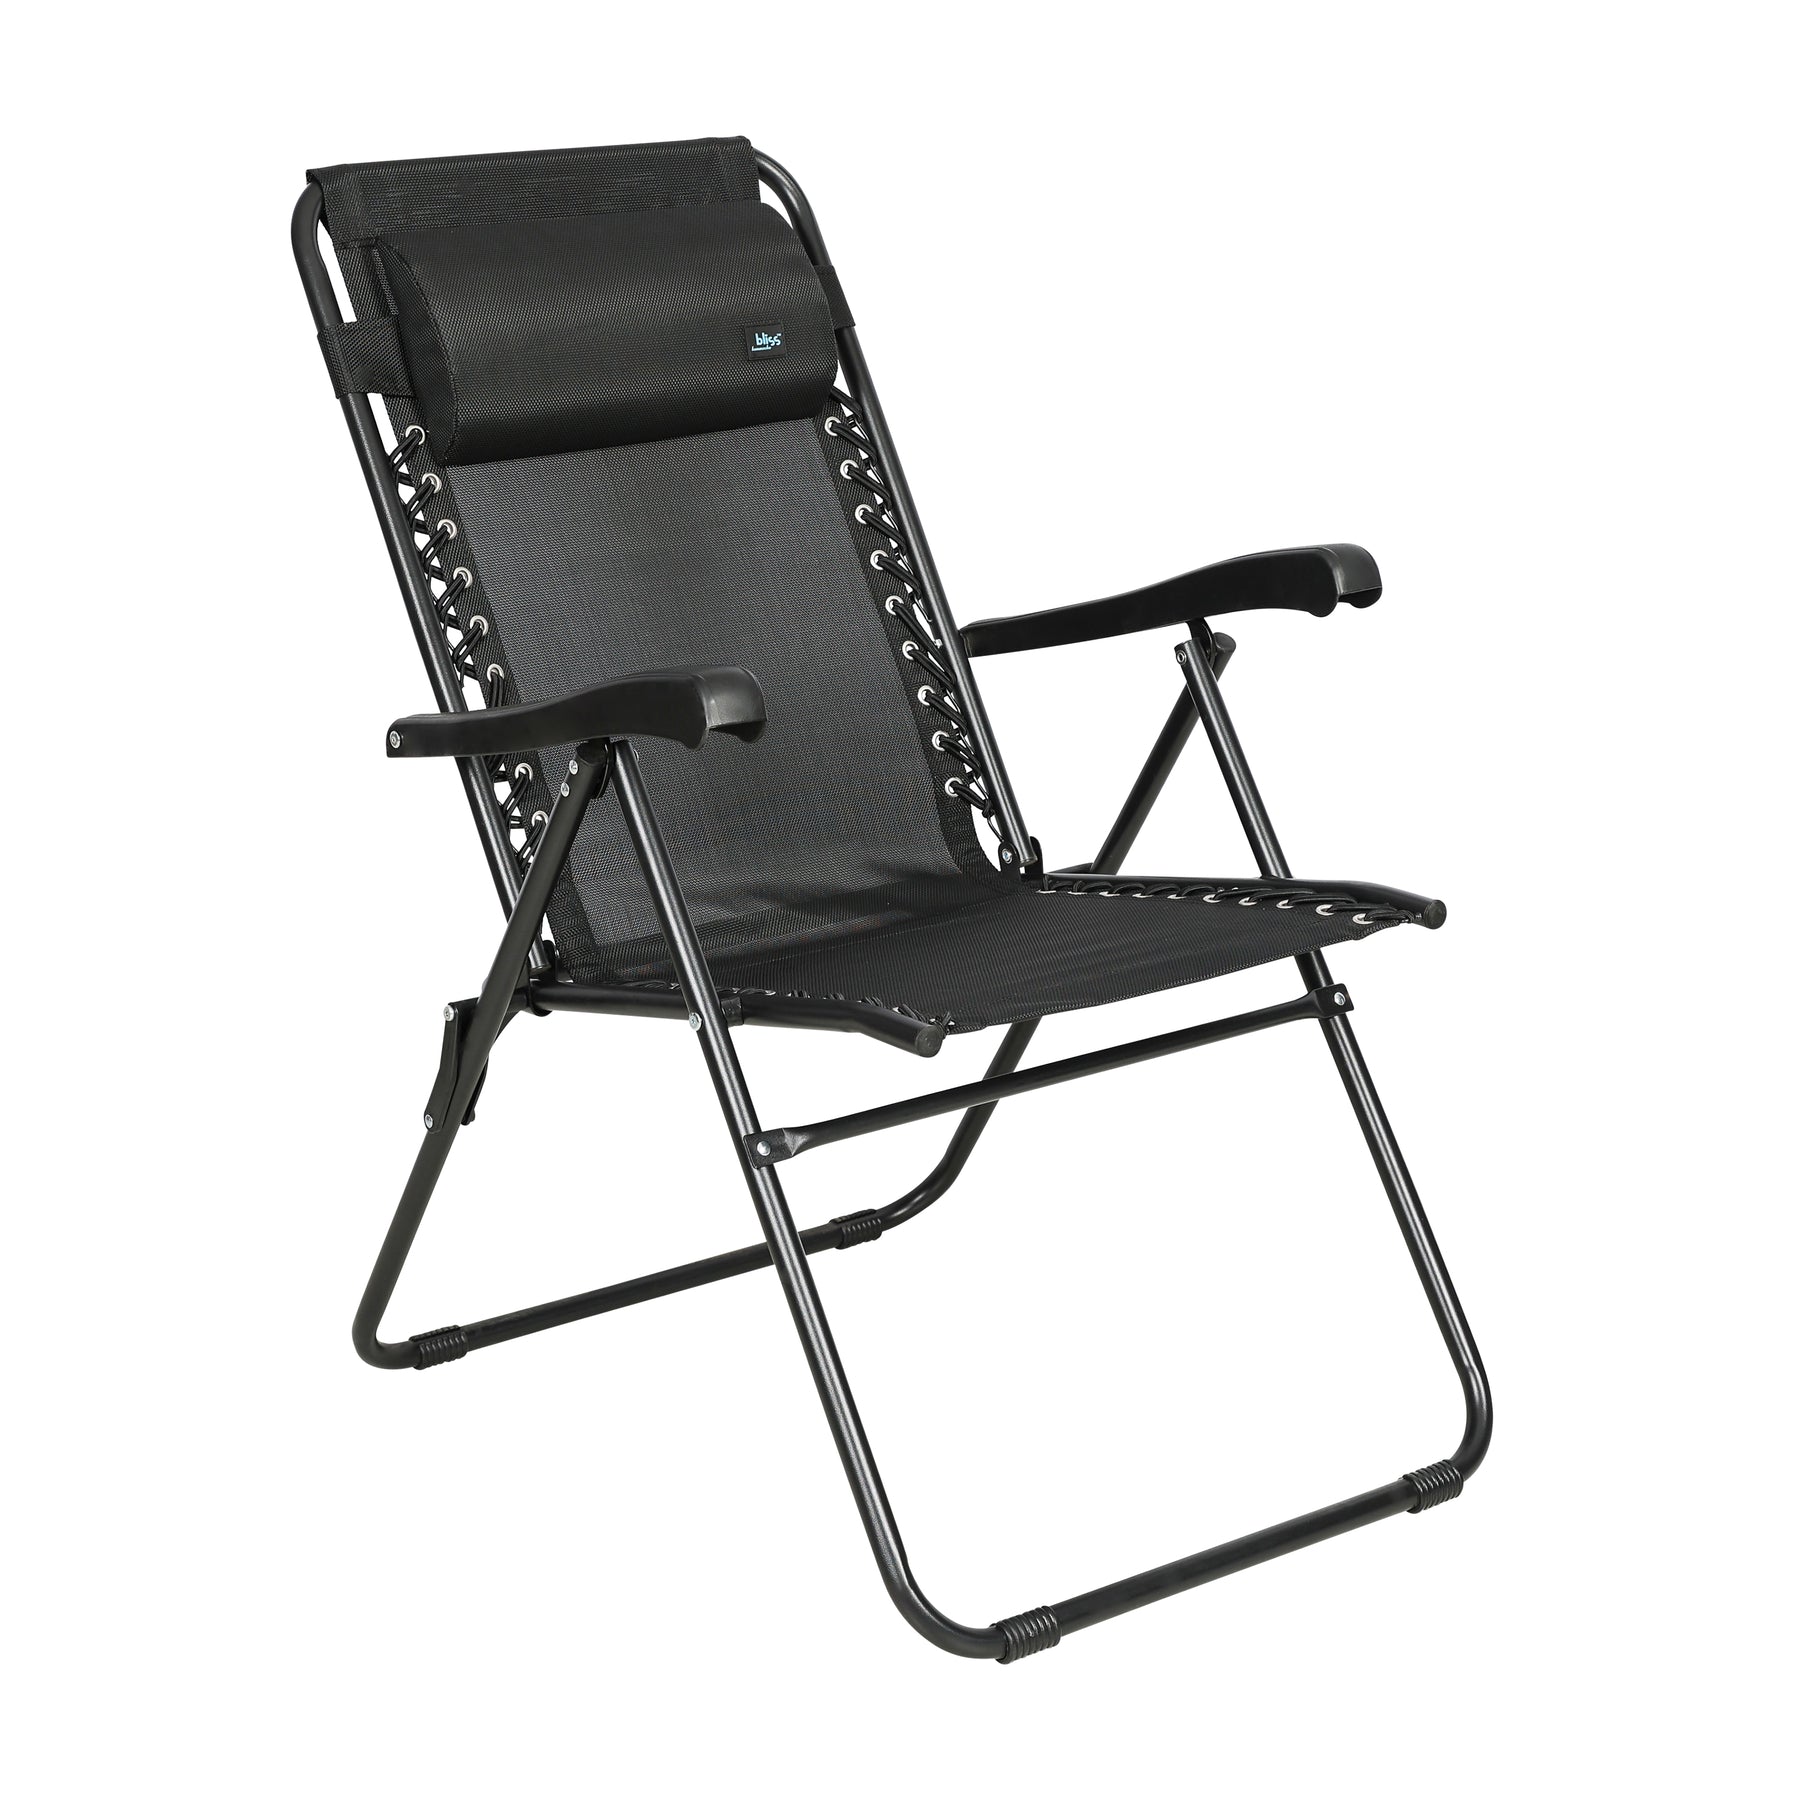 Bliss Hammocks 26-inch Wide Reclining Sling Chair with Pillow in the black variation.